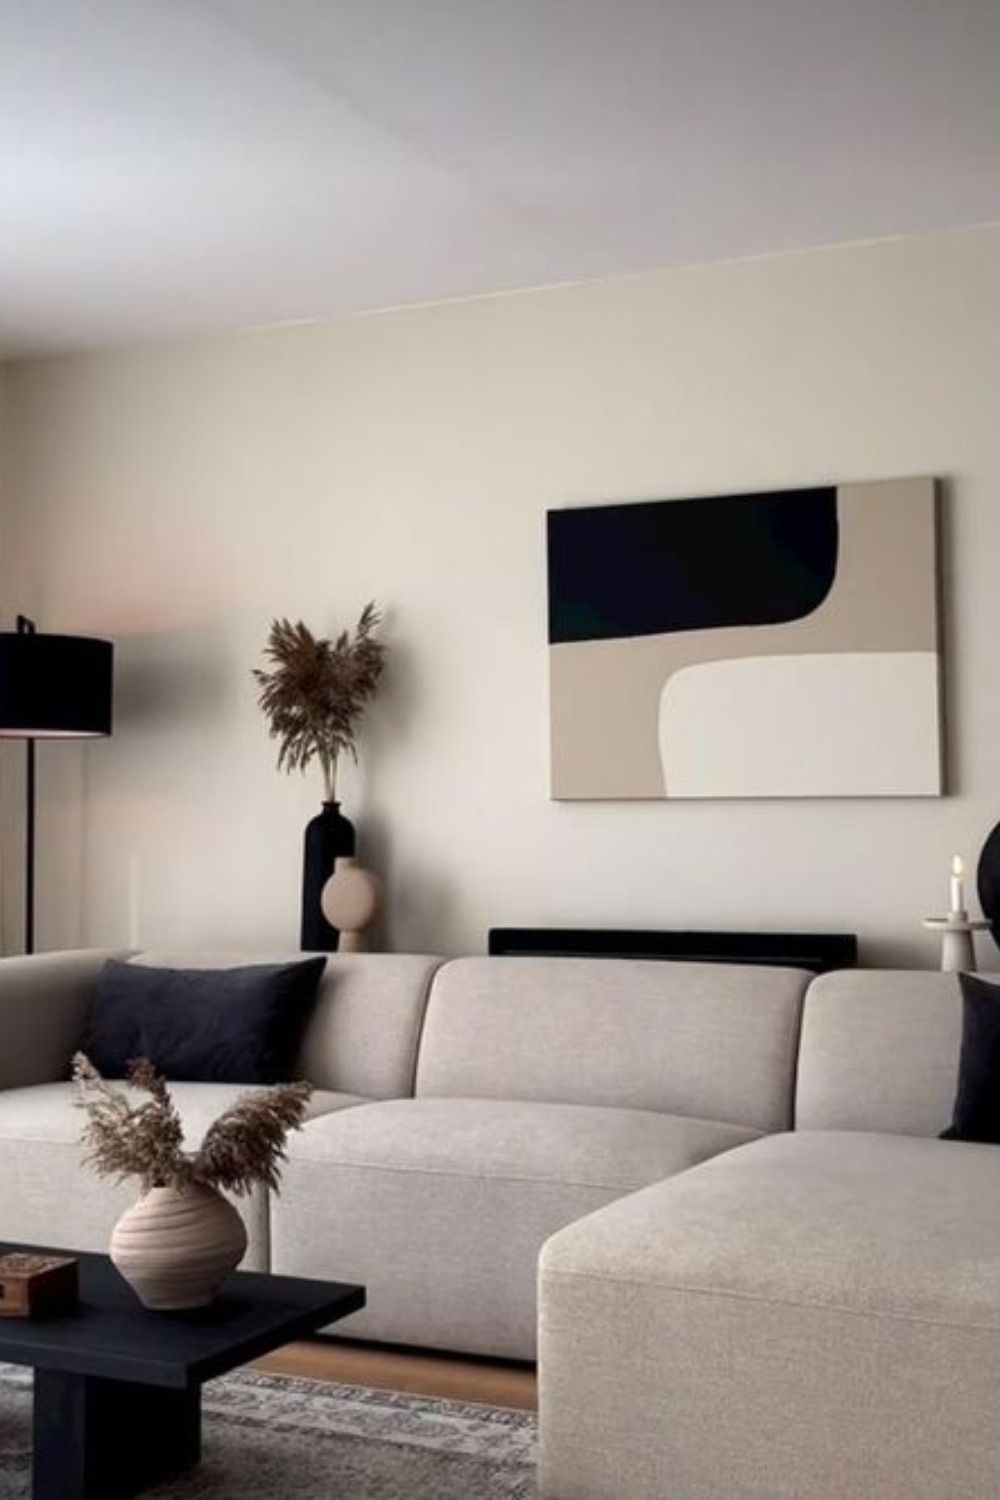 Black and White Room Ideas: How to Add a Pop of Color for Accent